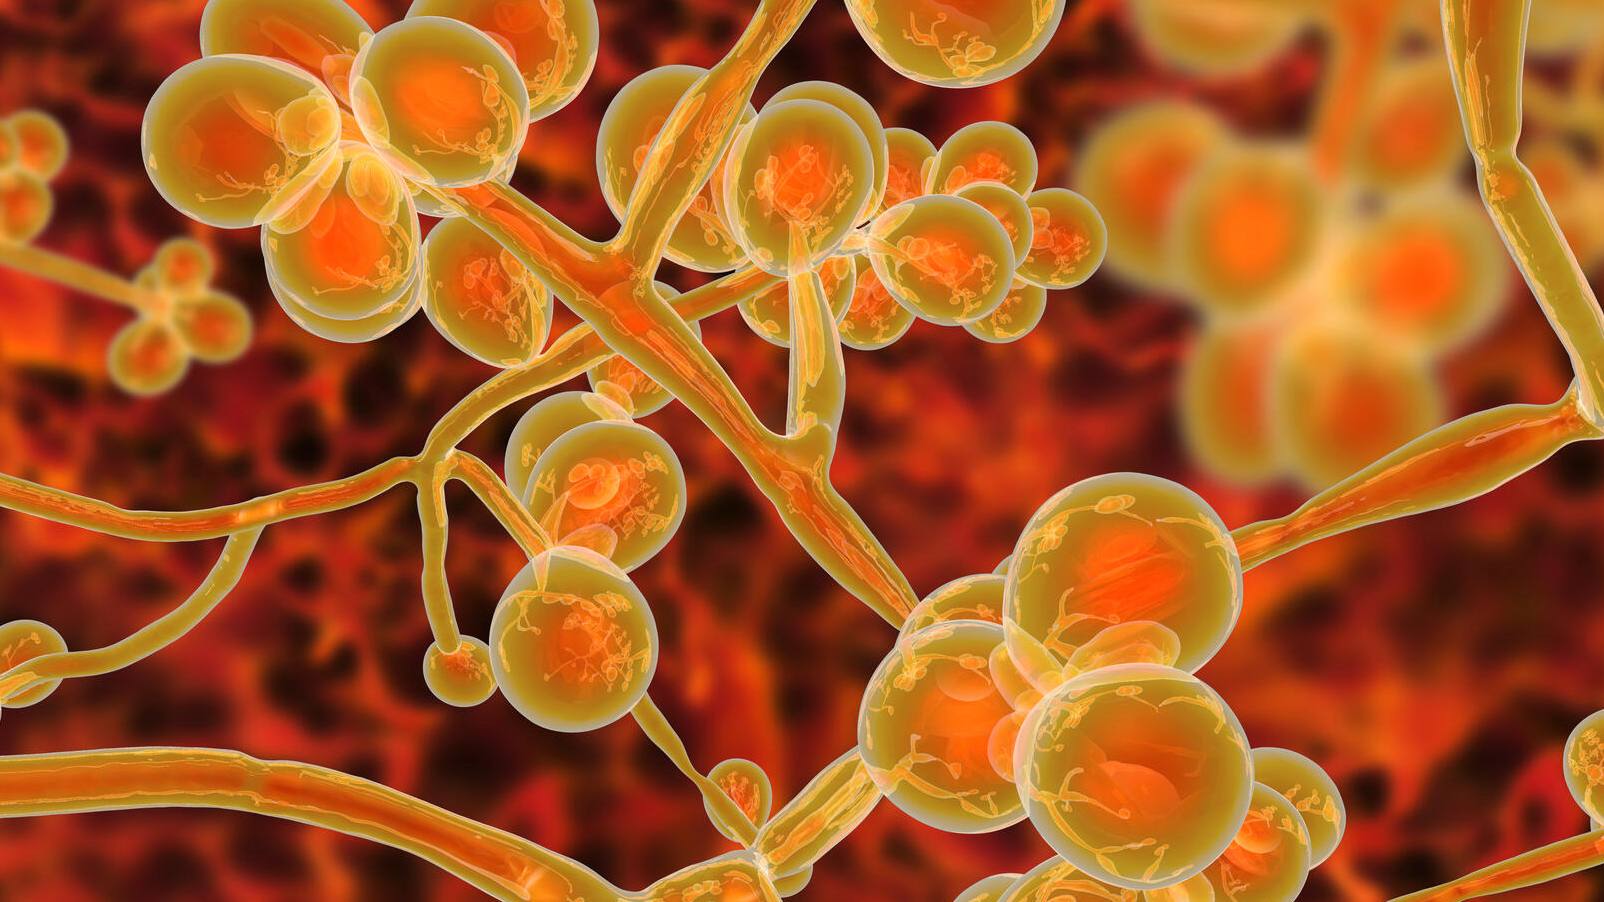 Candida auris: This fungus is a health care concern - Mayo Clinic News ...